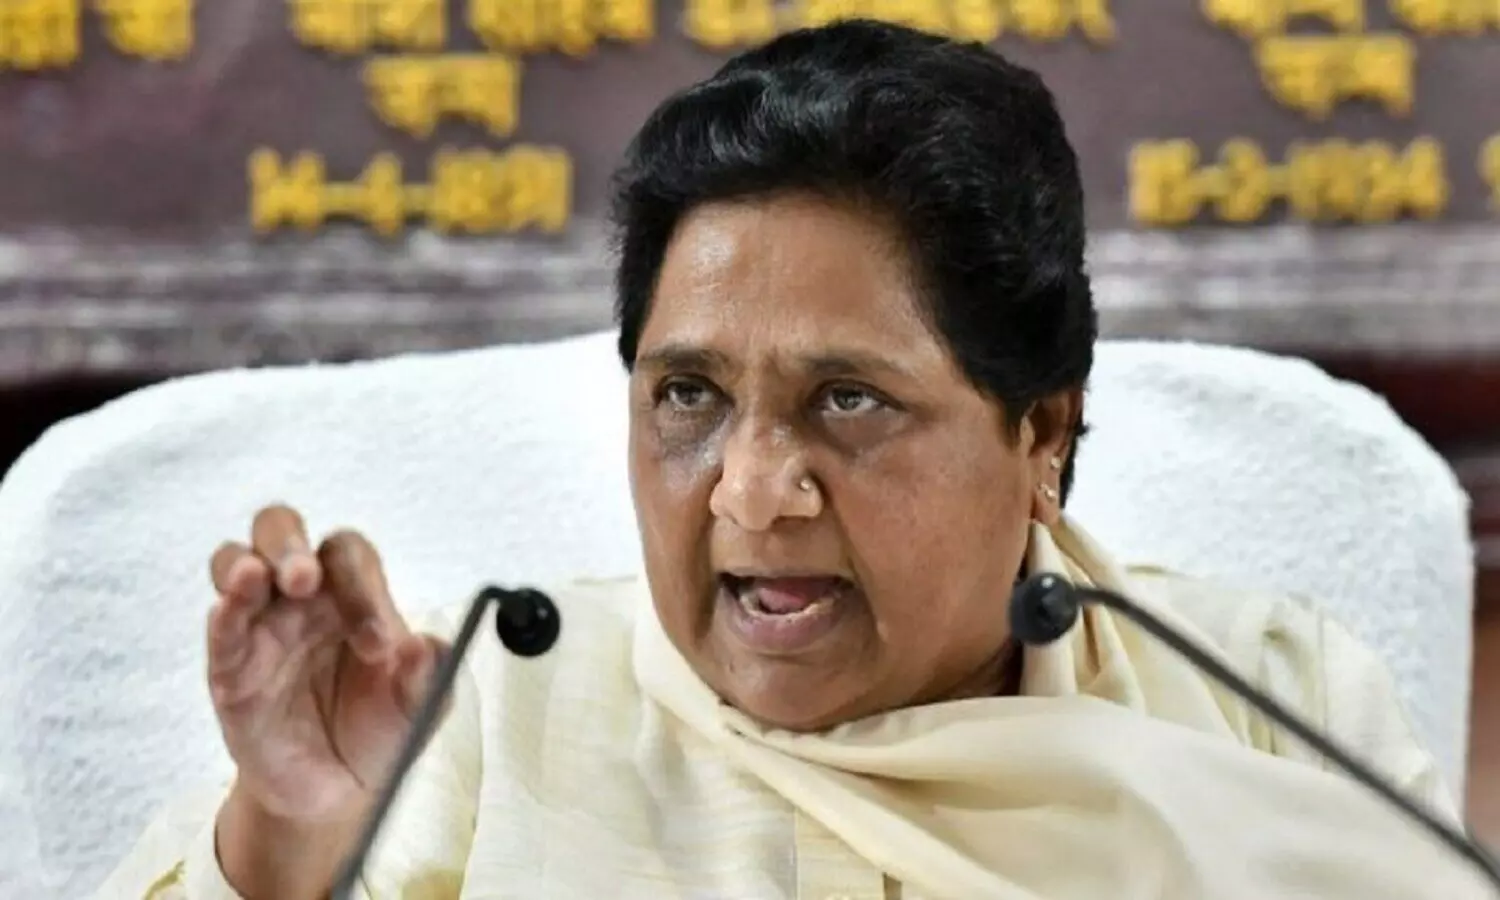 Mayawati expressed concern about Coronas growing infection